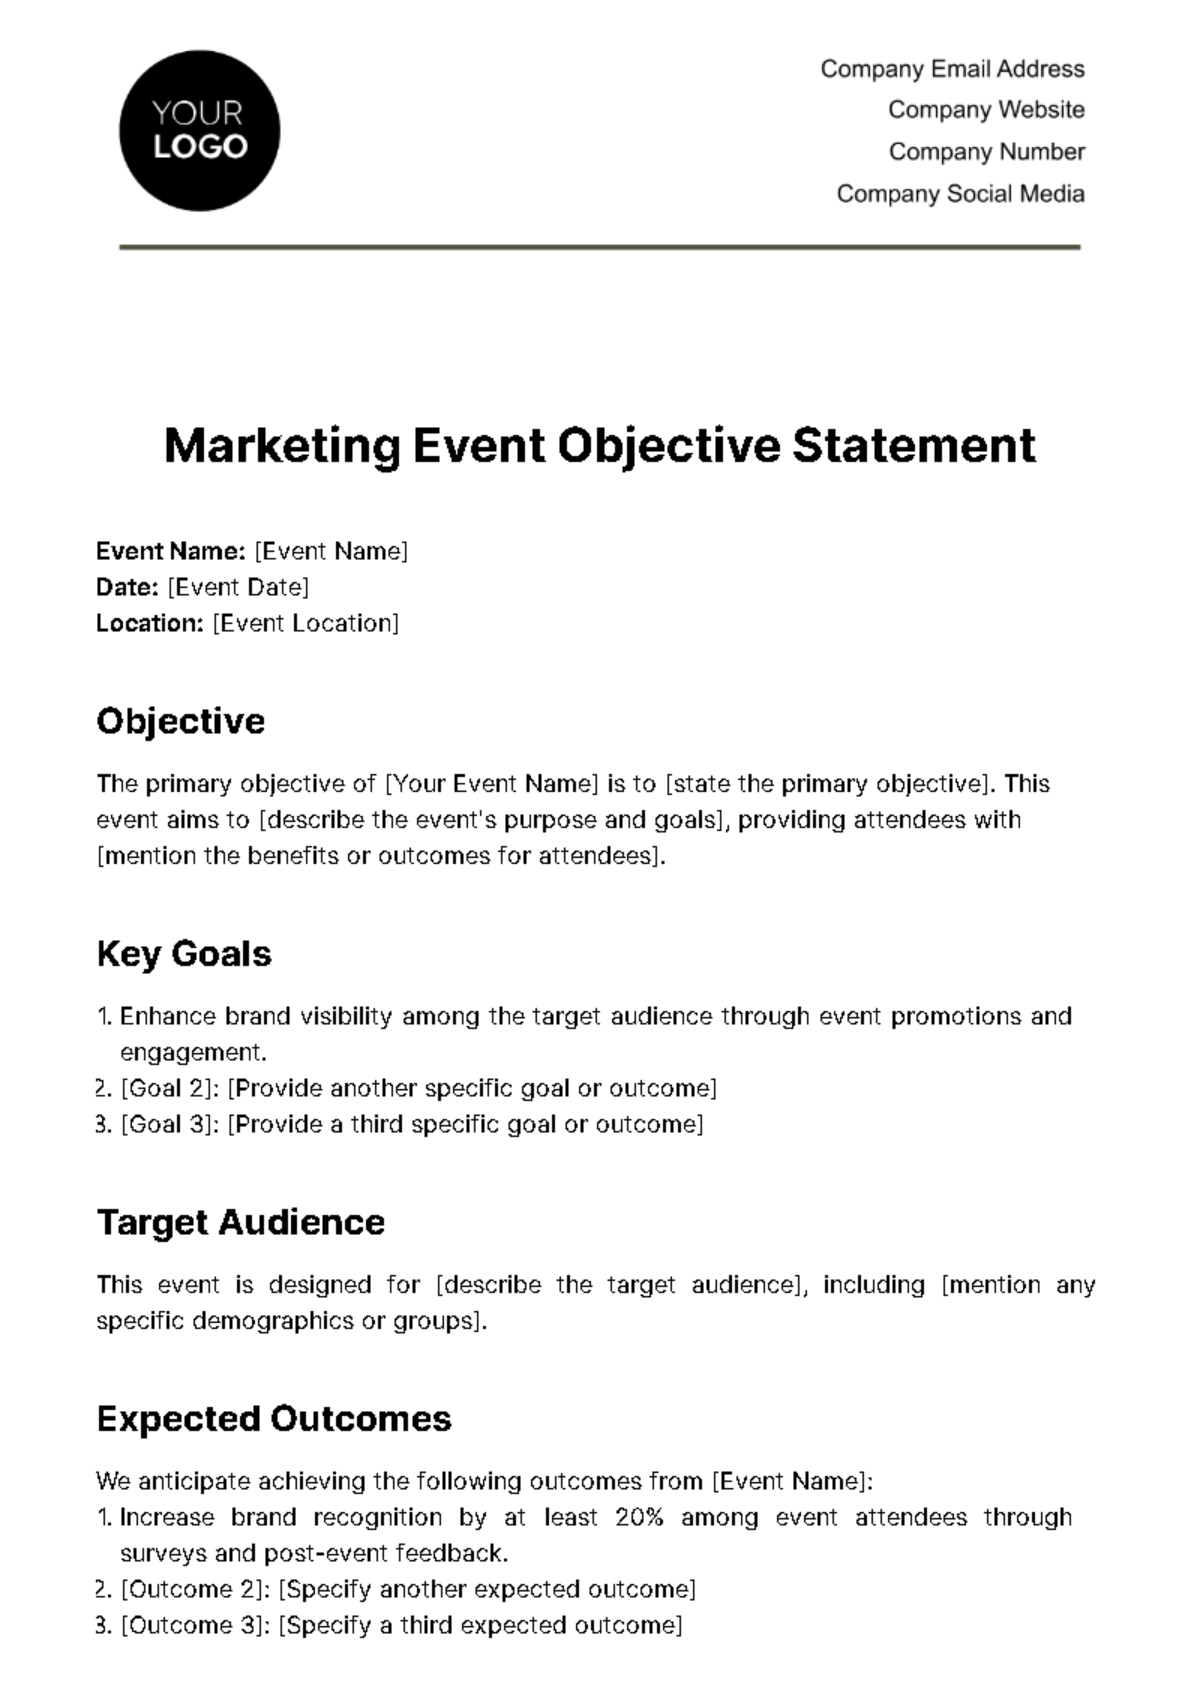 Free Marketing Event Objective Statement Template